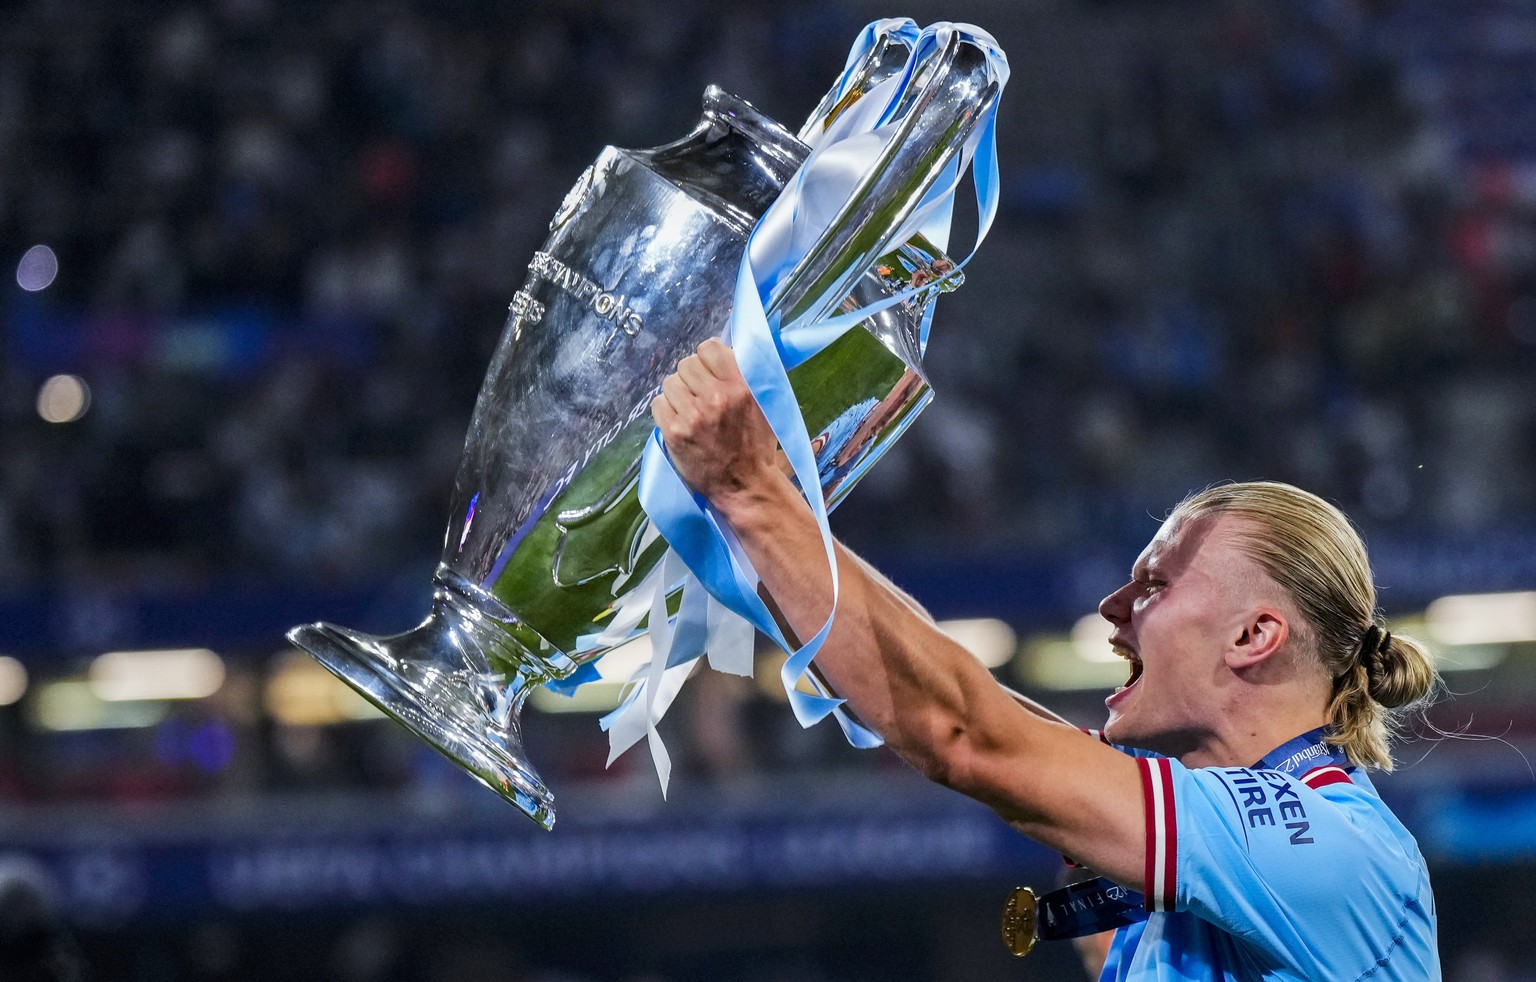 Manchester City&#039;s Erling Haaland celebrates with the trophy after winning the Champions League final soccer match between Manchester City and Inter Milan at the Ataturk Olympic Stadium in Istanbu ...